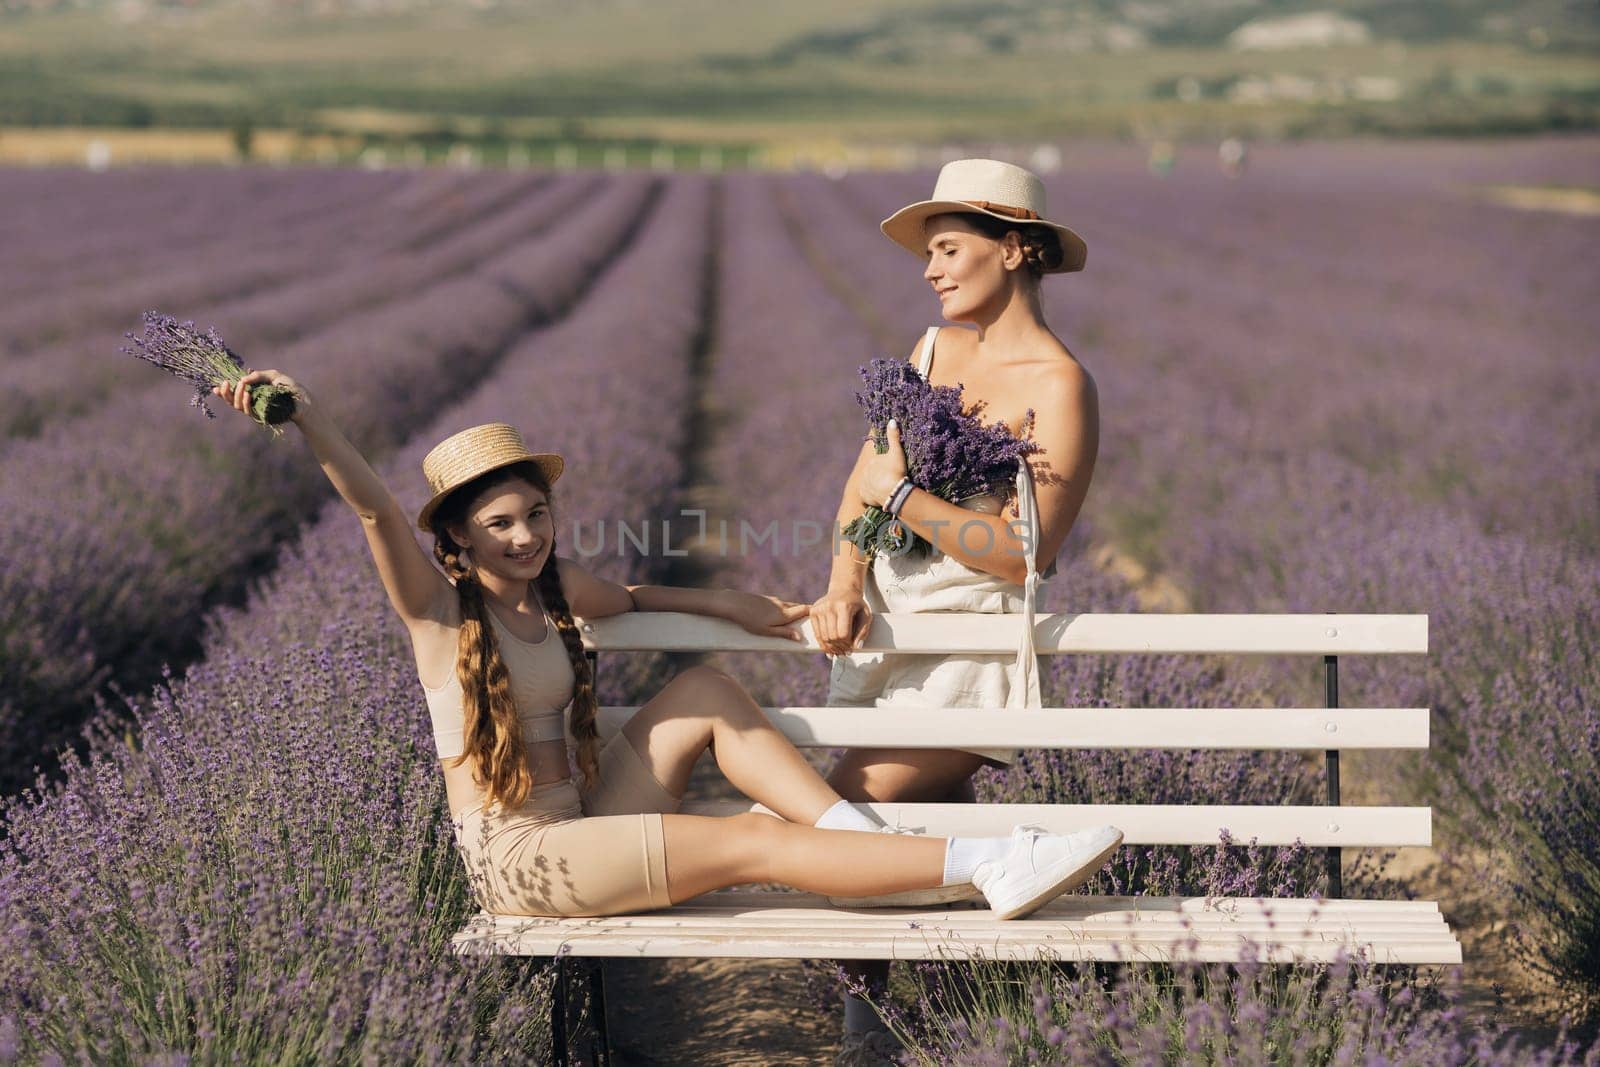 woman child sitting bench in field lavender. The woman is holding a bouquet of flowers, and the child is holding a bouquet as well. The scene is peaceful and serene. by Matiunina